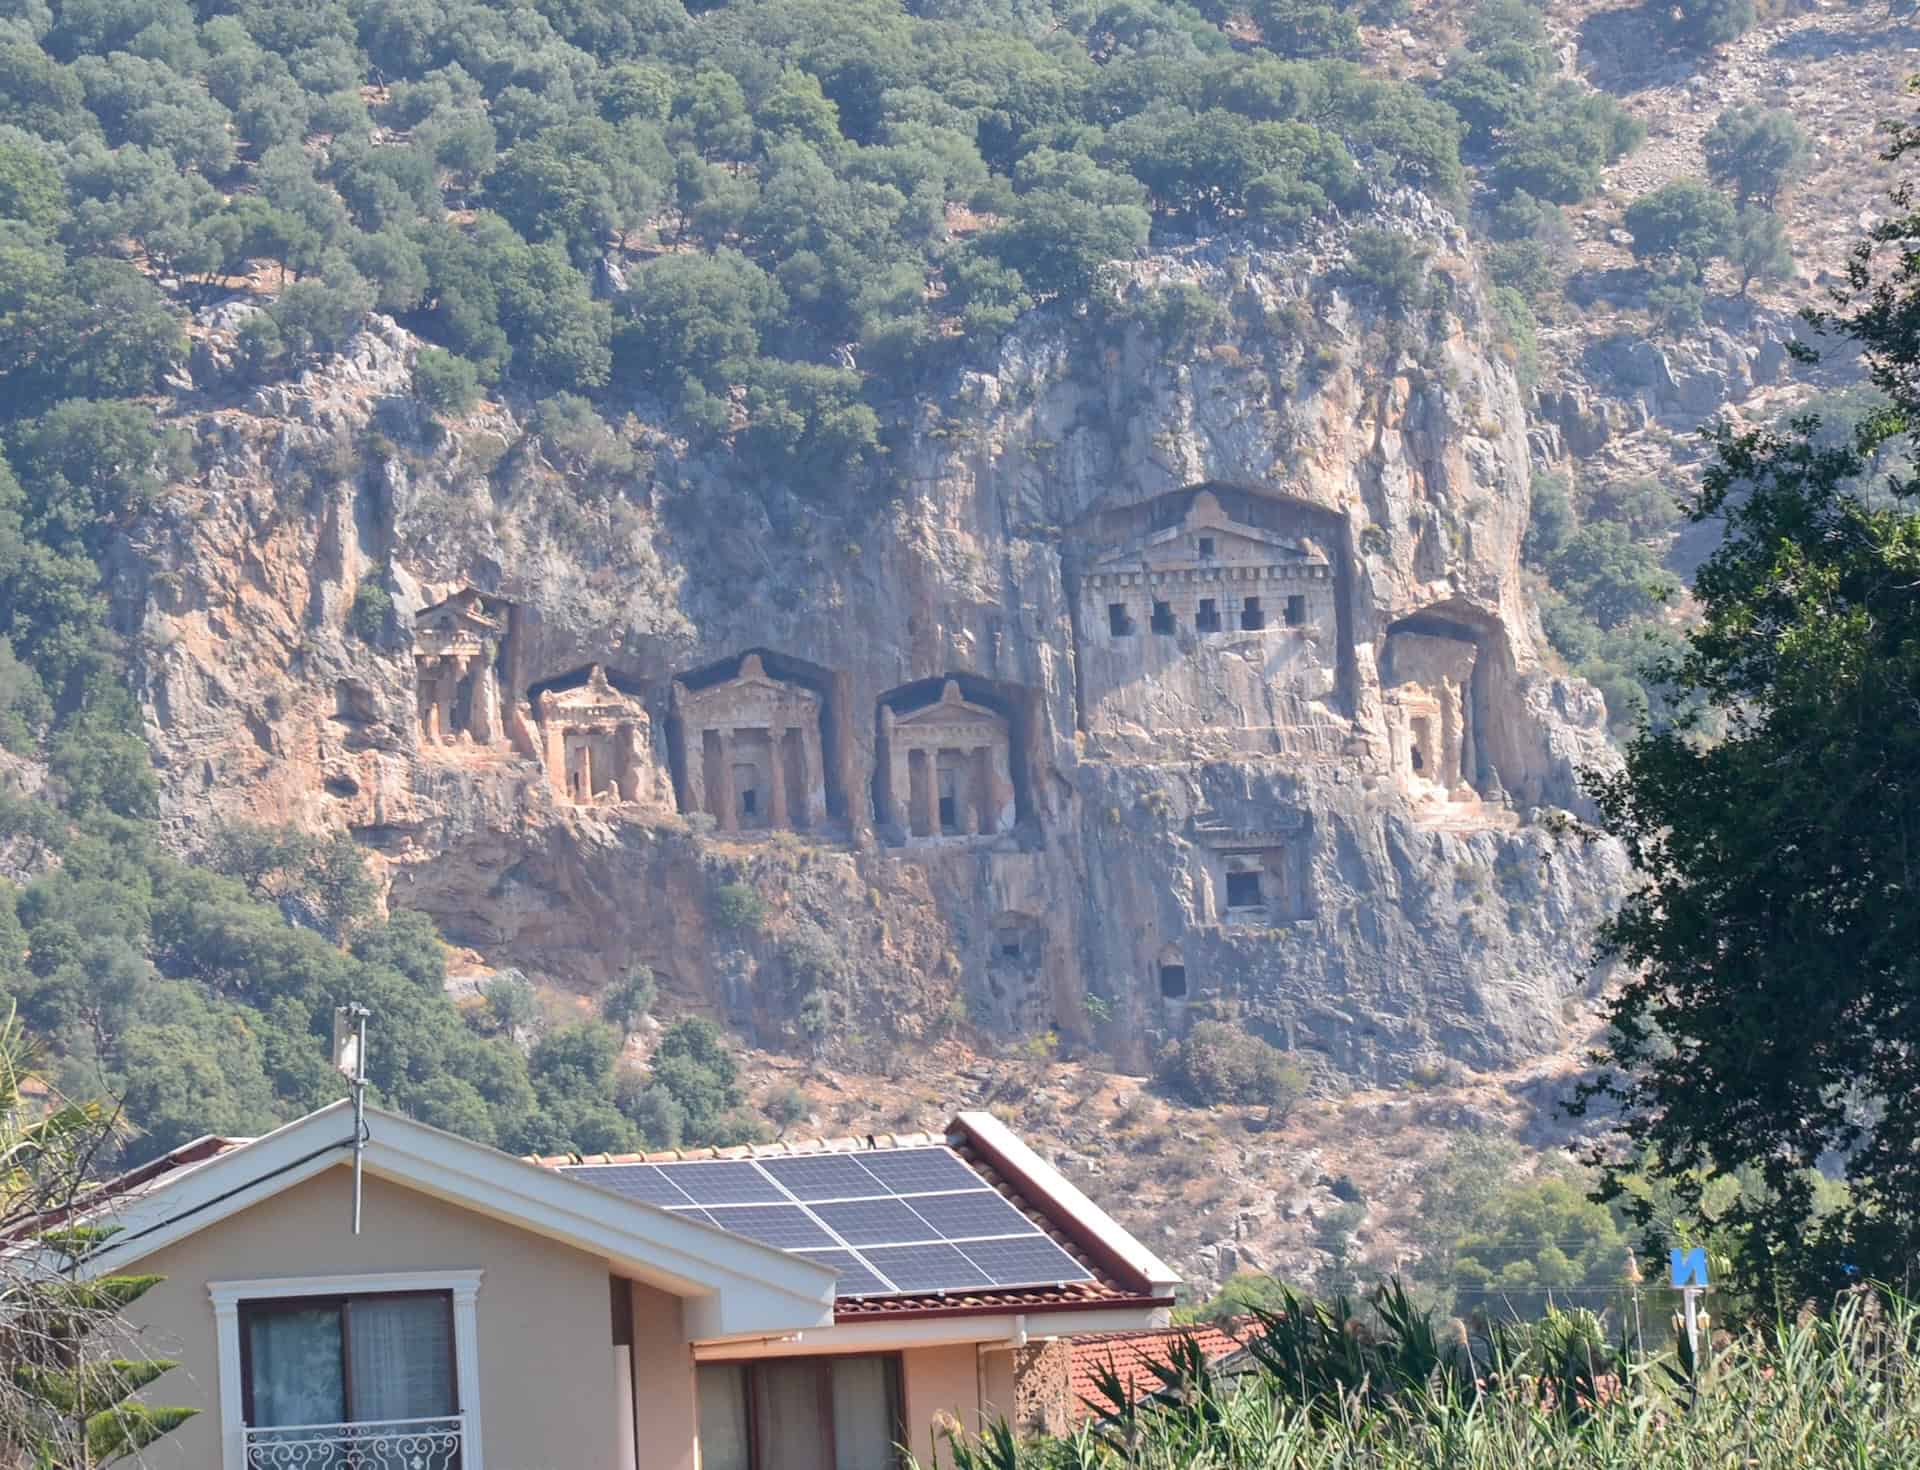 Rock-cut tombs from DALKO